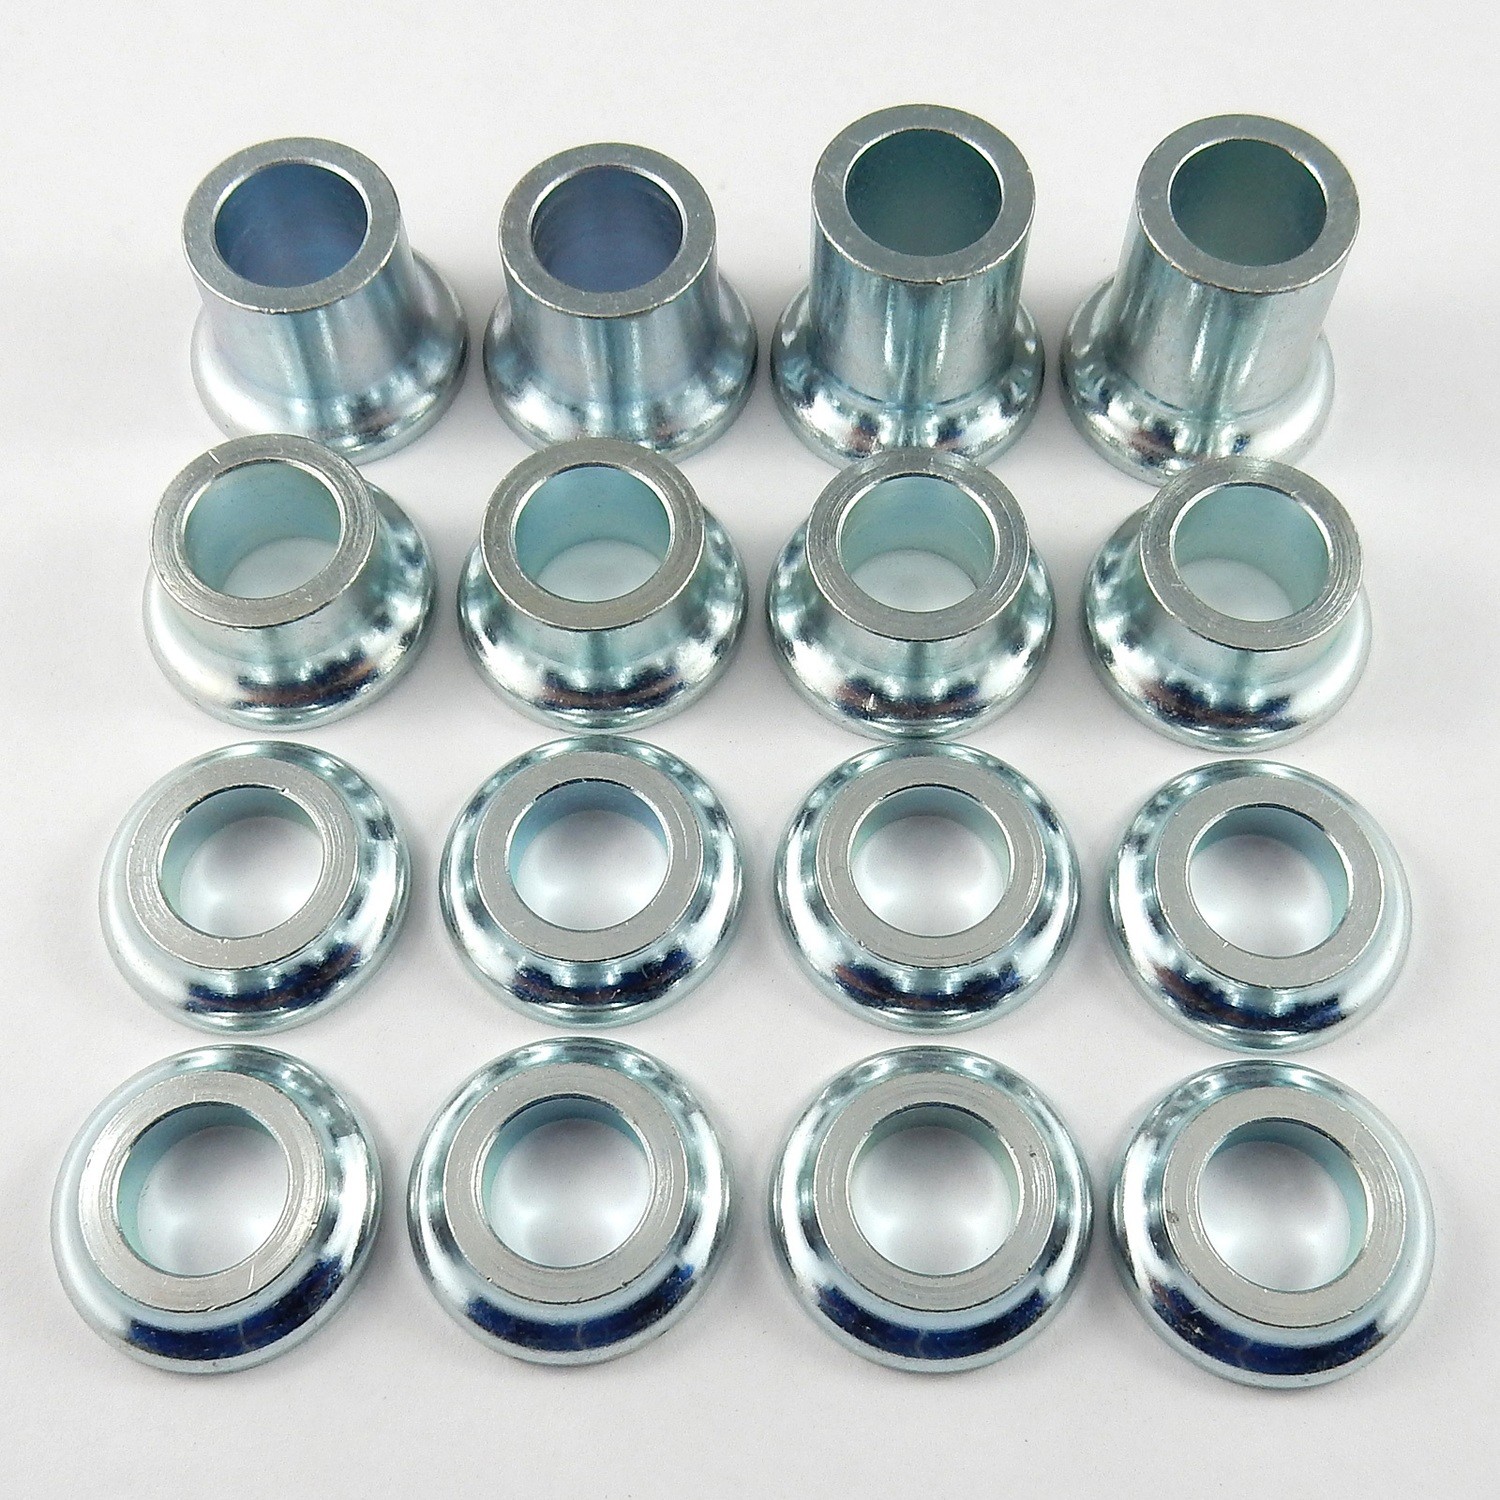 1/2 Tapered Spacer Kit - Steel